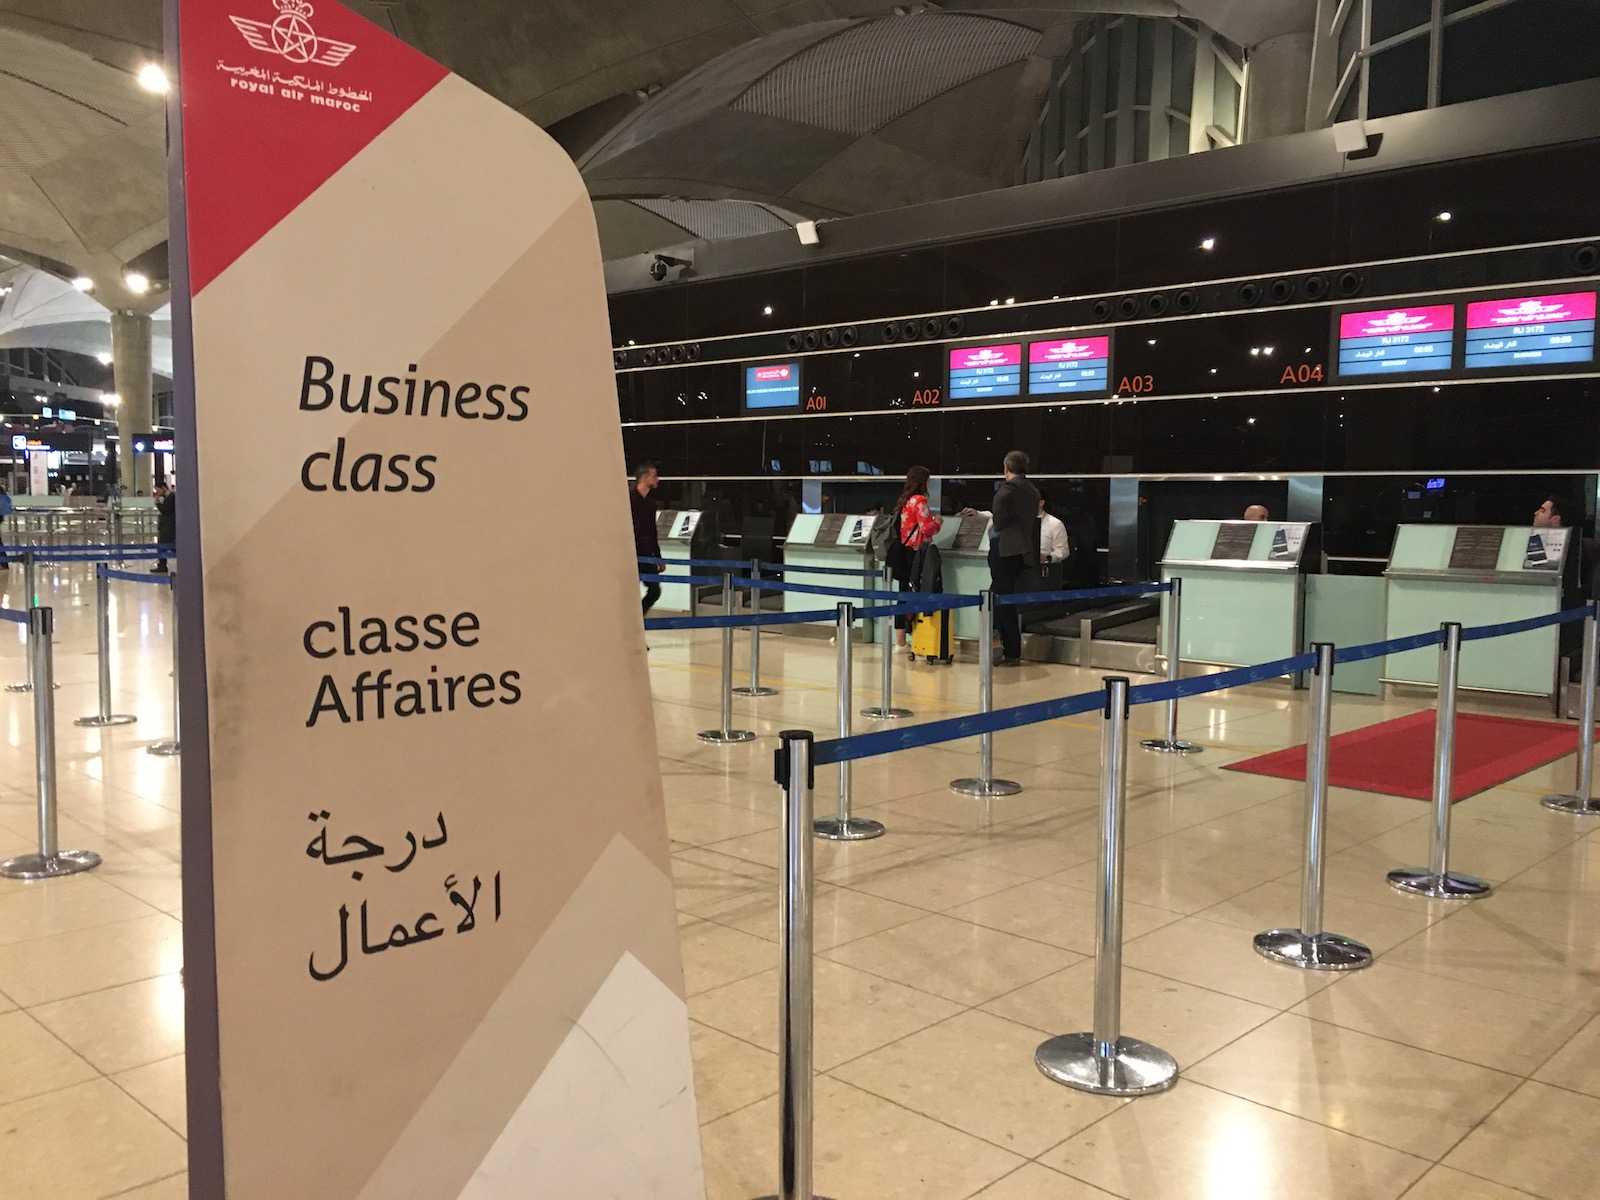 Royal Air Maroc business class check in